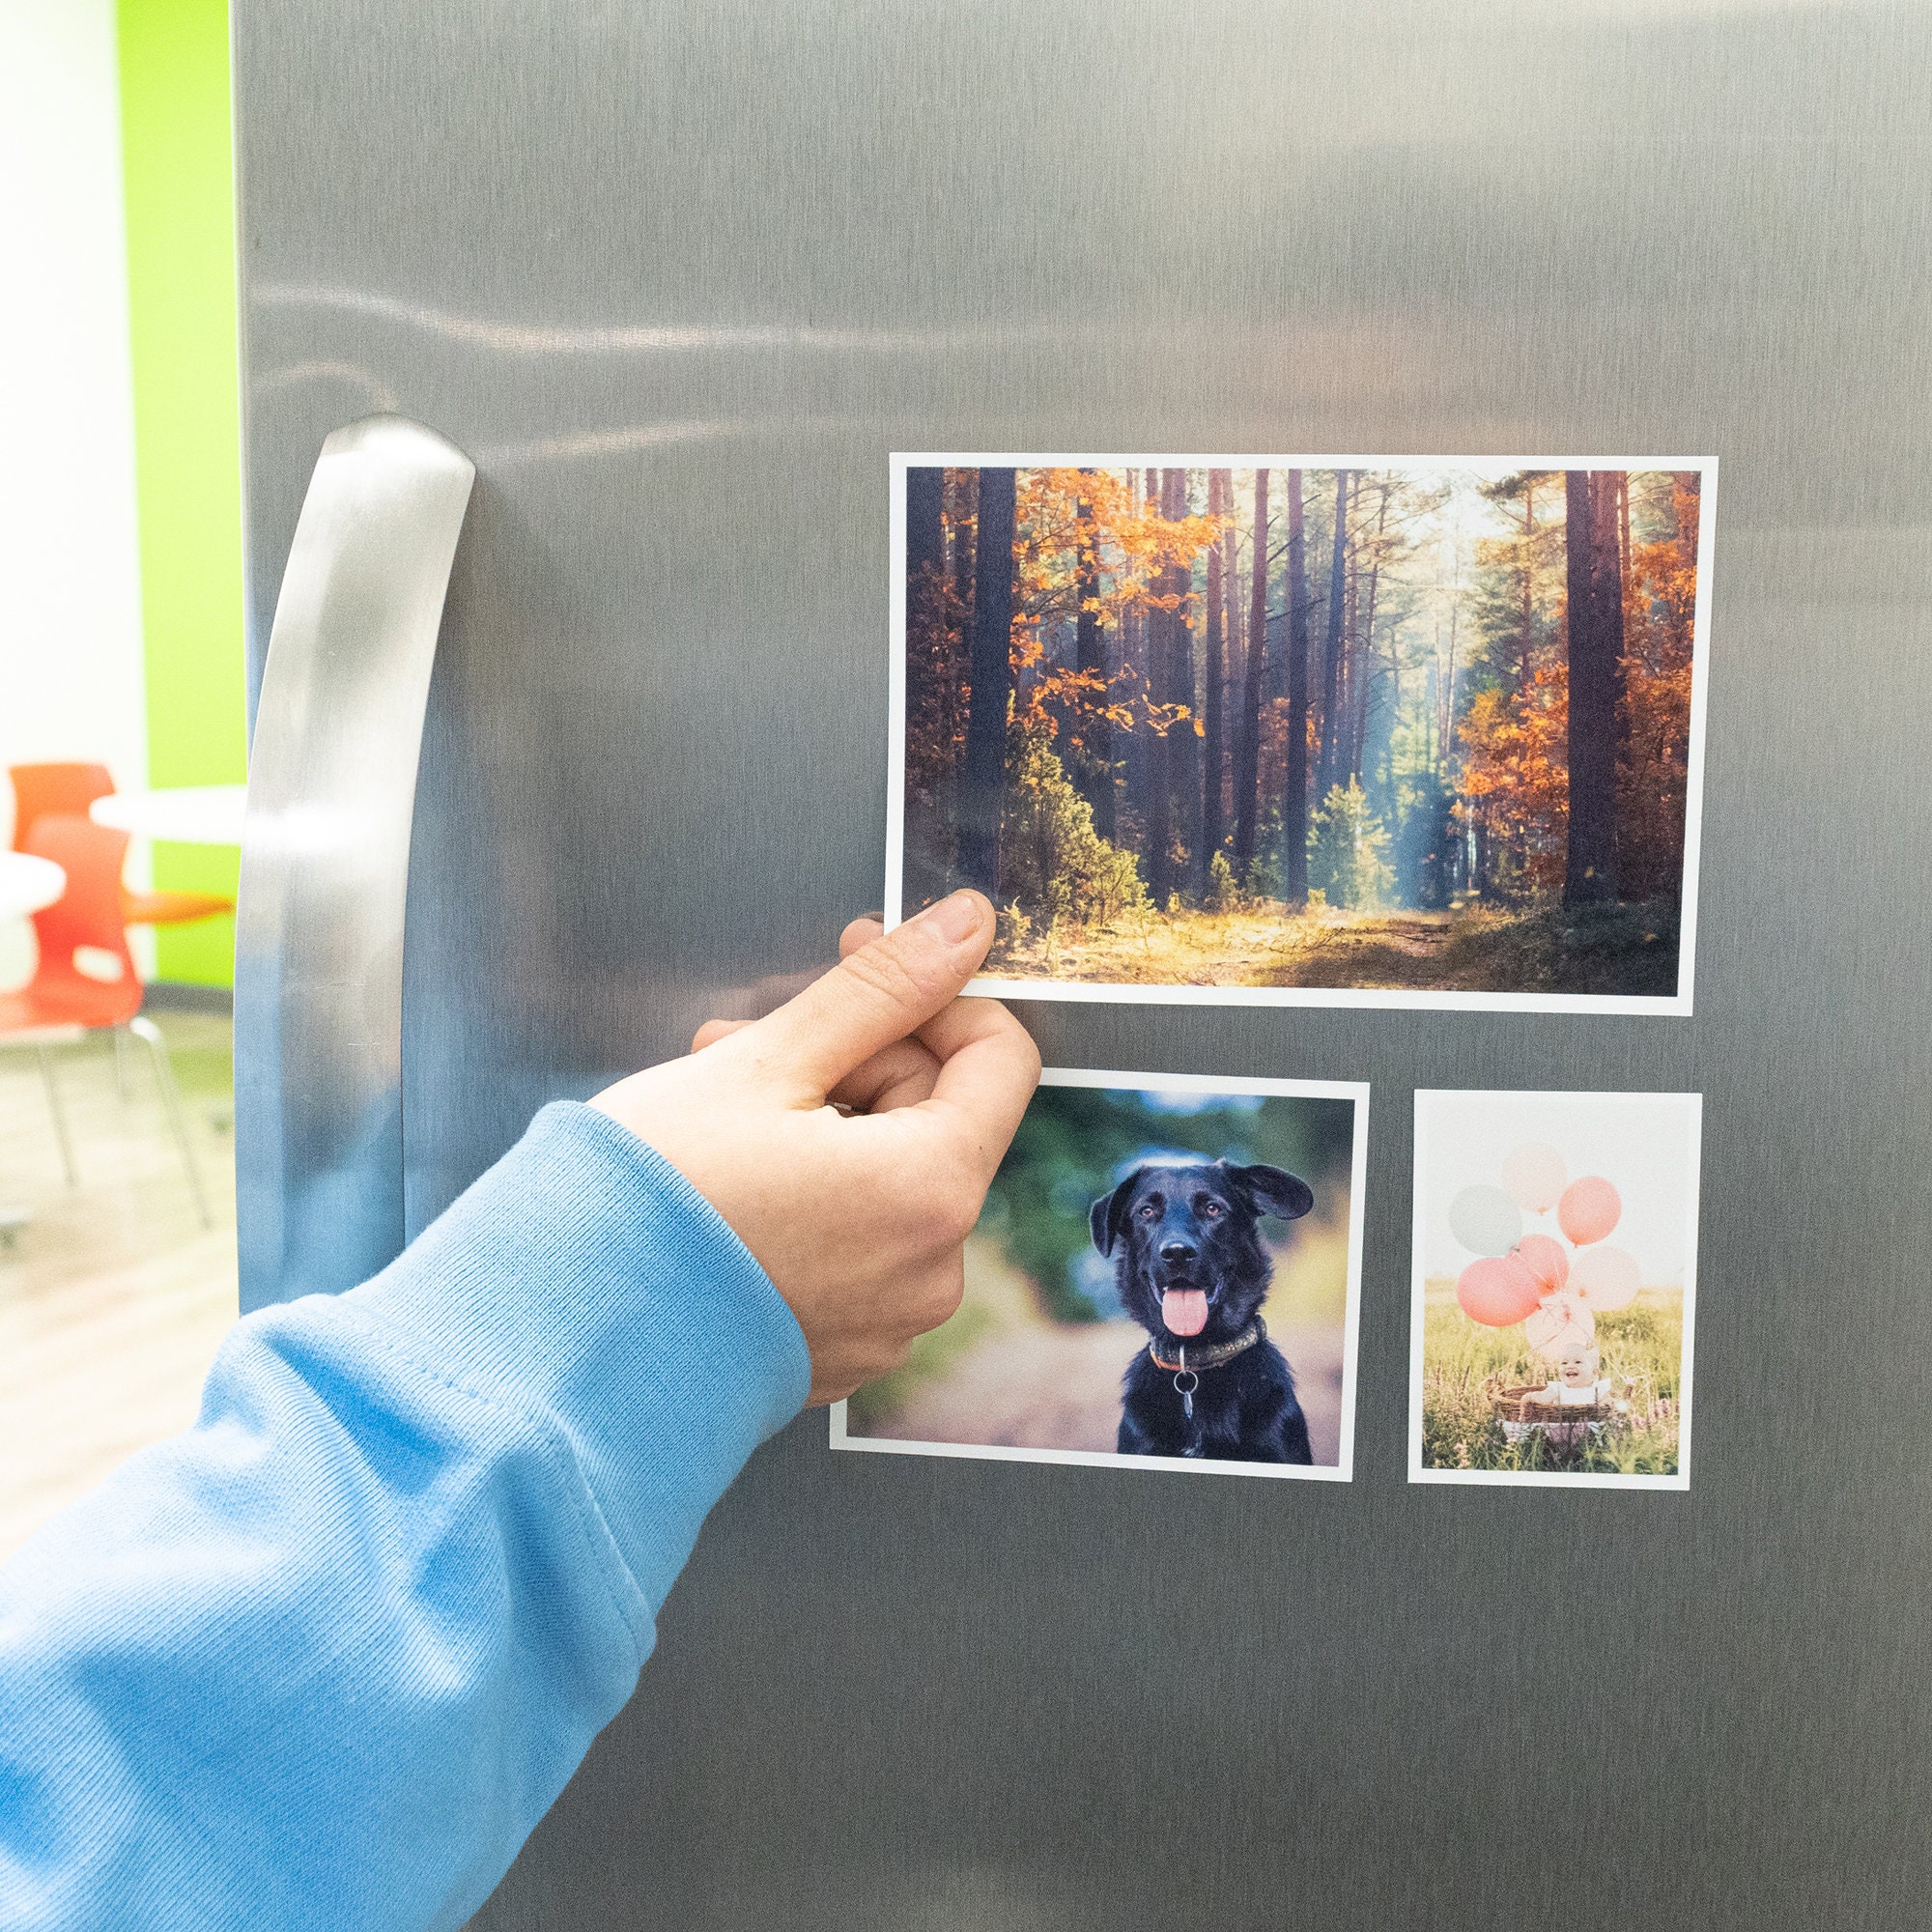 Fridge Magnets Photo Custom Magnets Photo Print Holiday Gift Picture  Personalized Magnets Gifts Photo Printing Gift for Mom Guest Gifts 